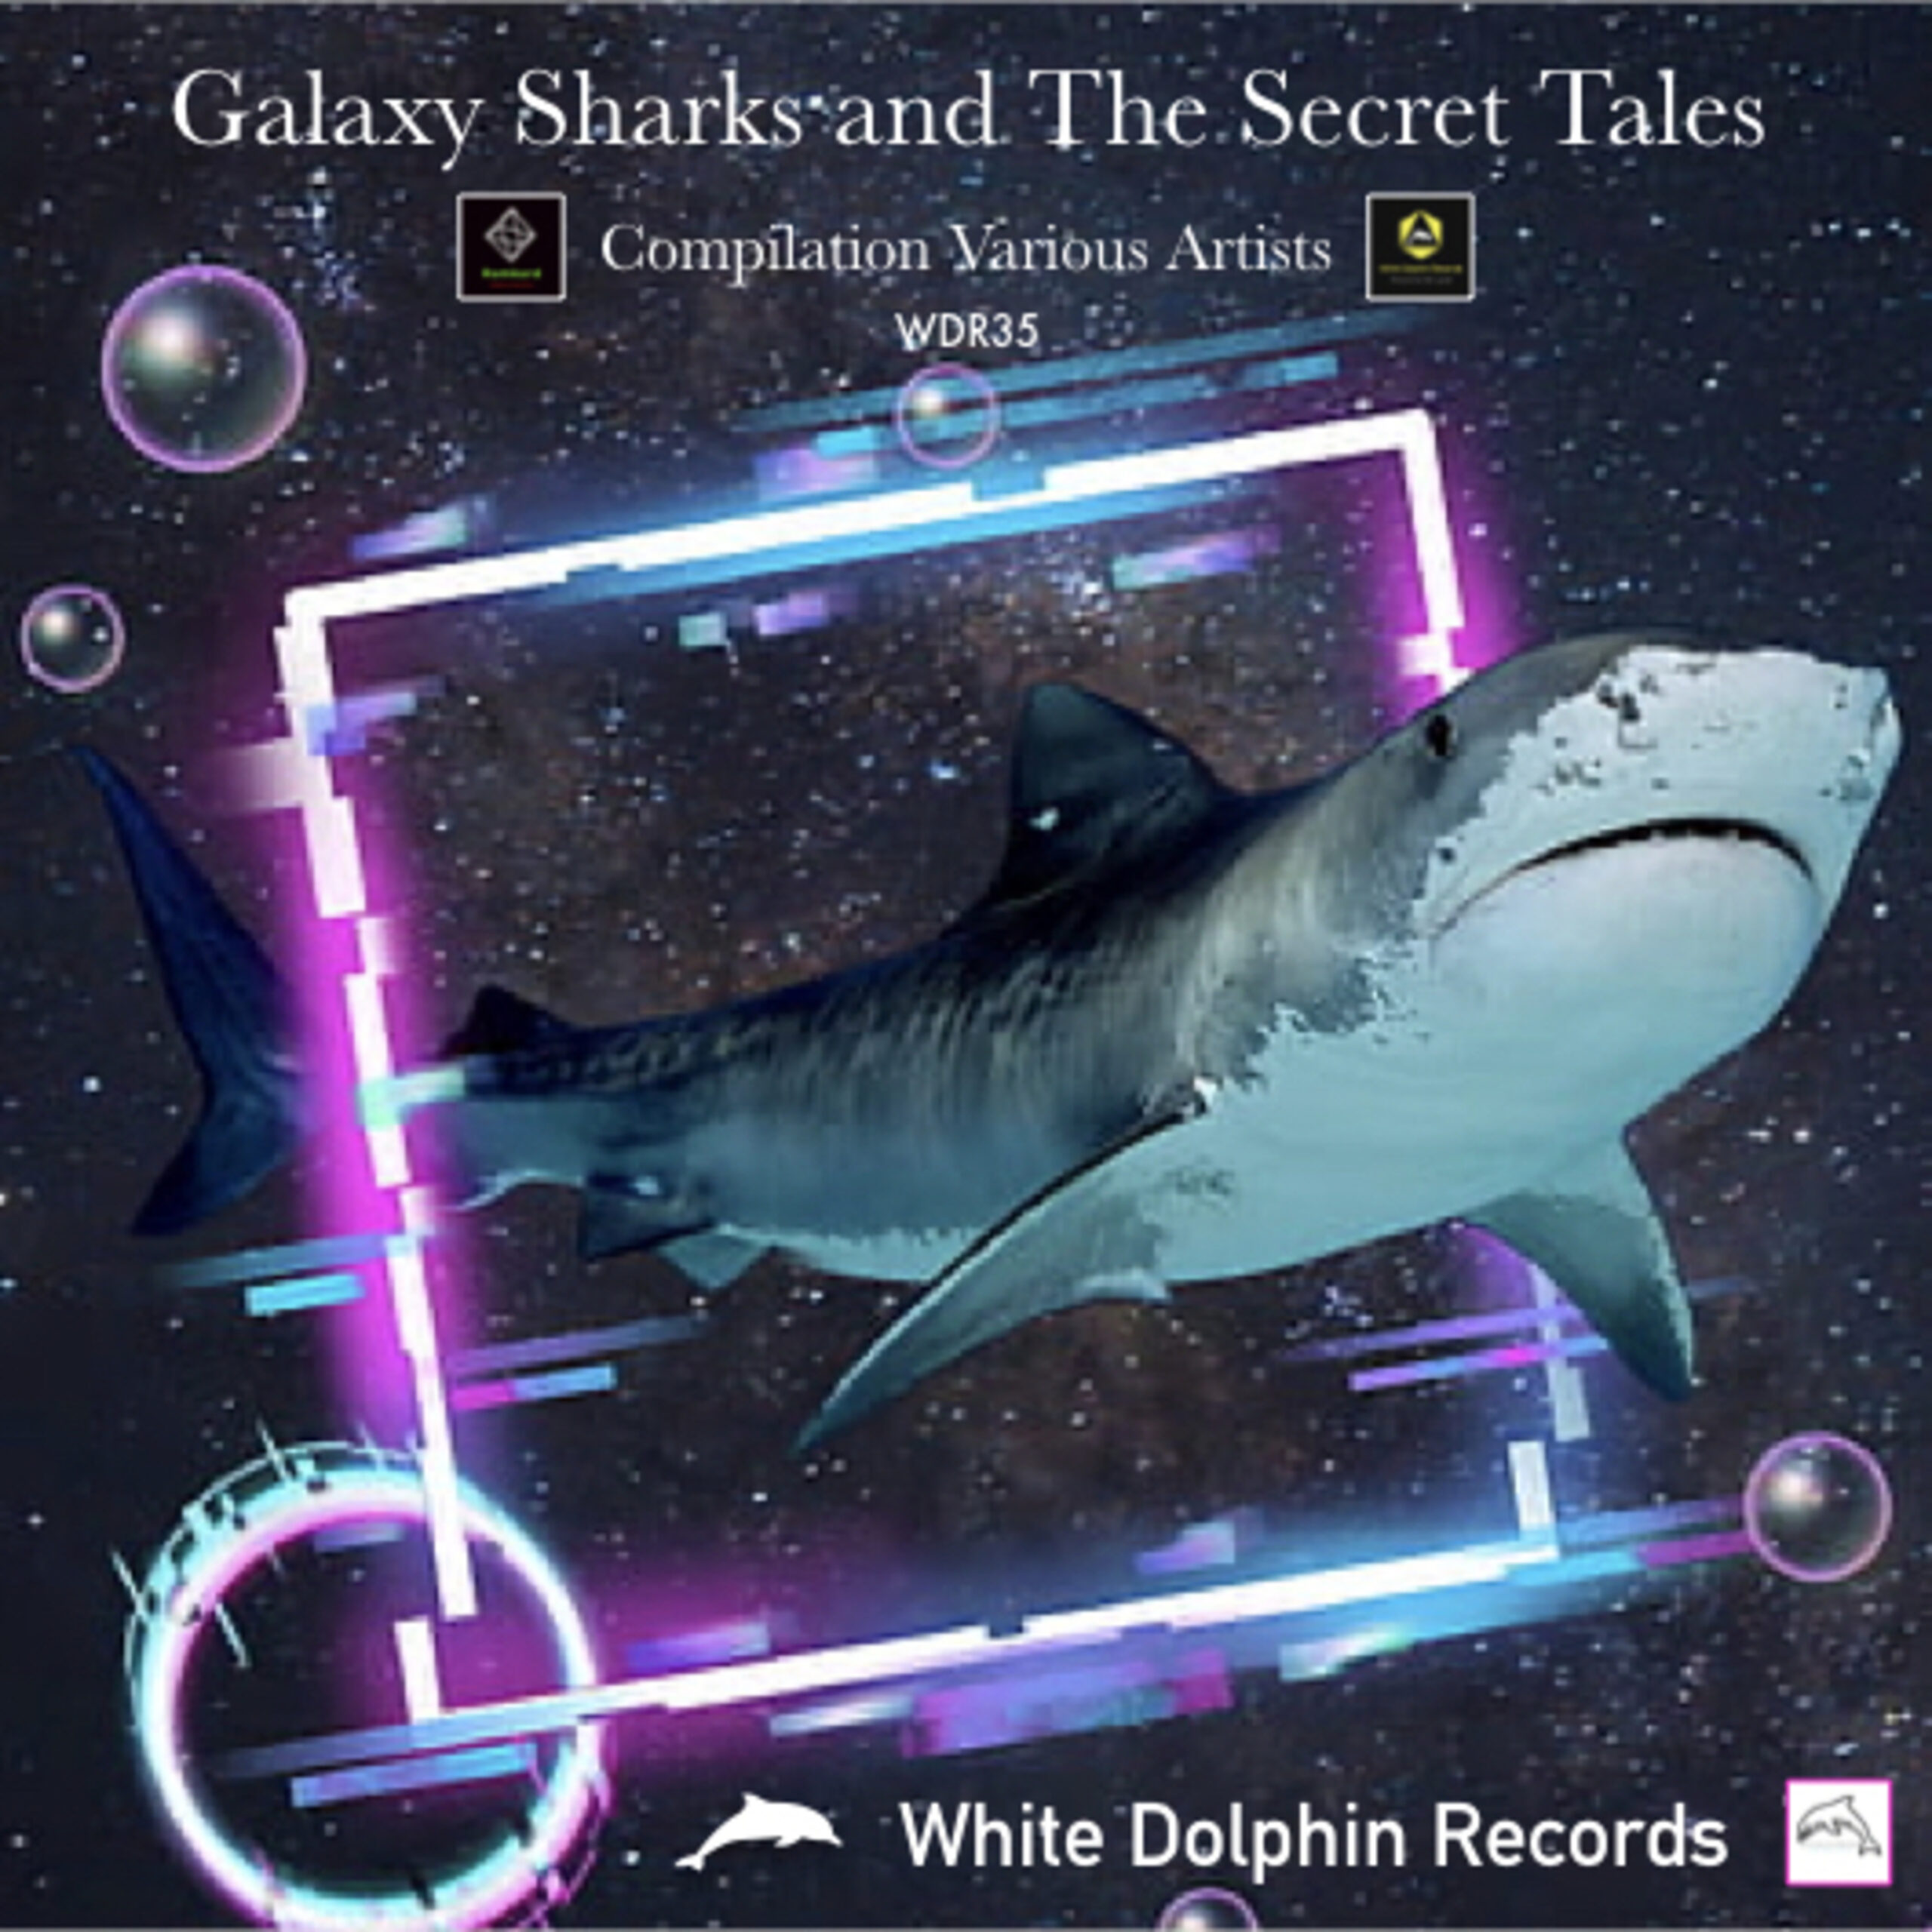 Galaxy Sharks and The Secret Tales